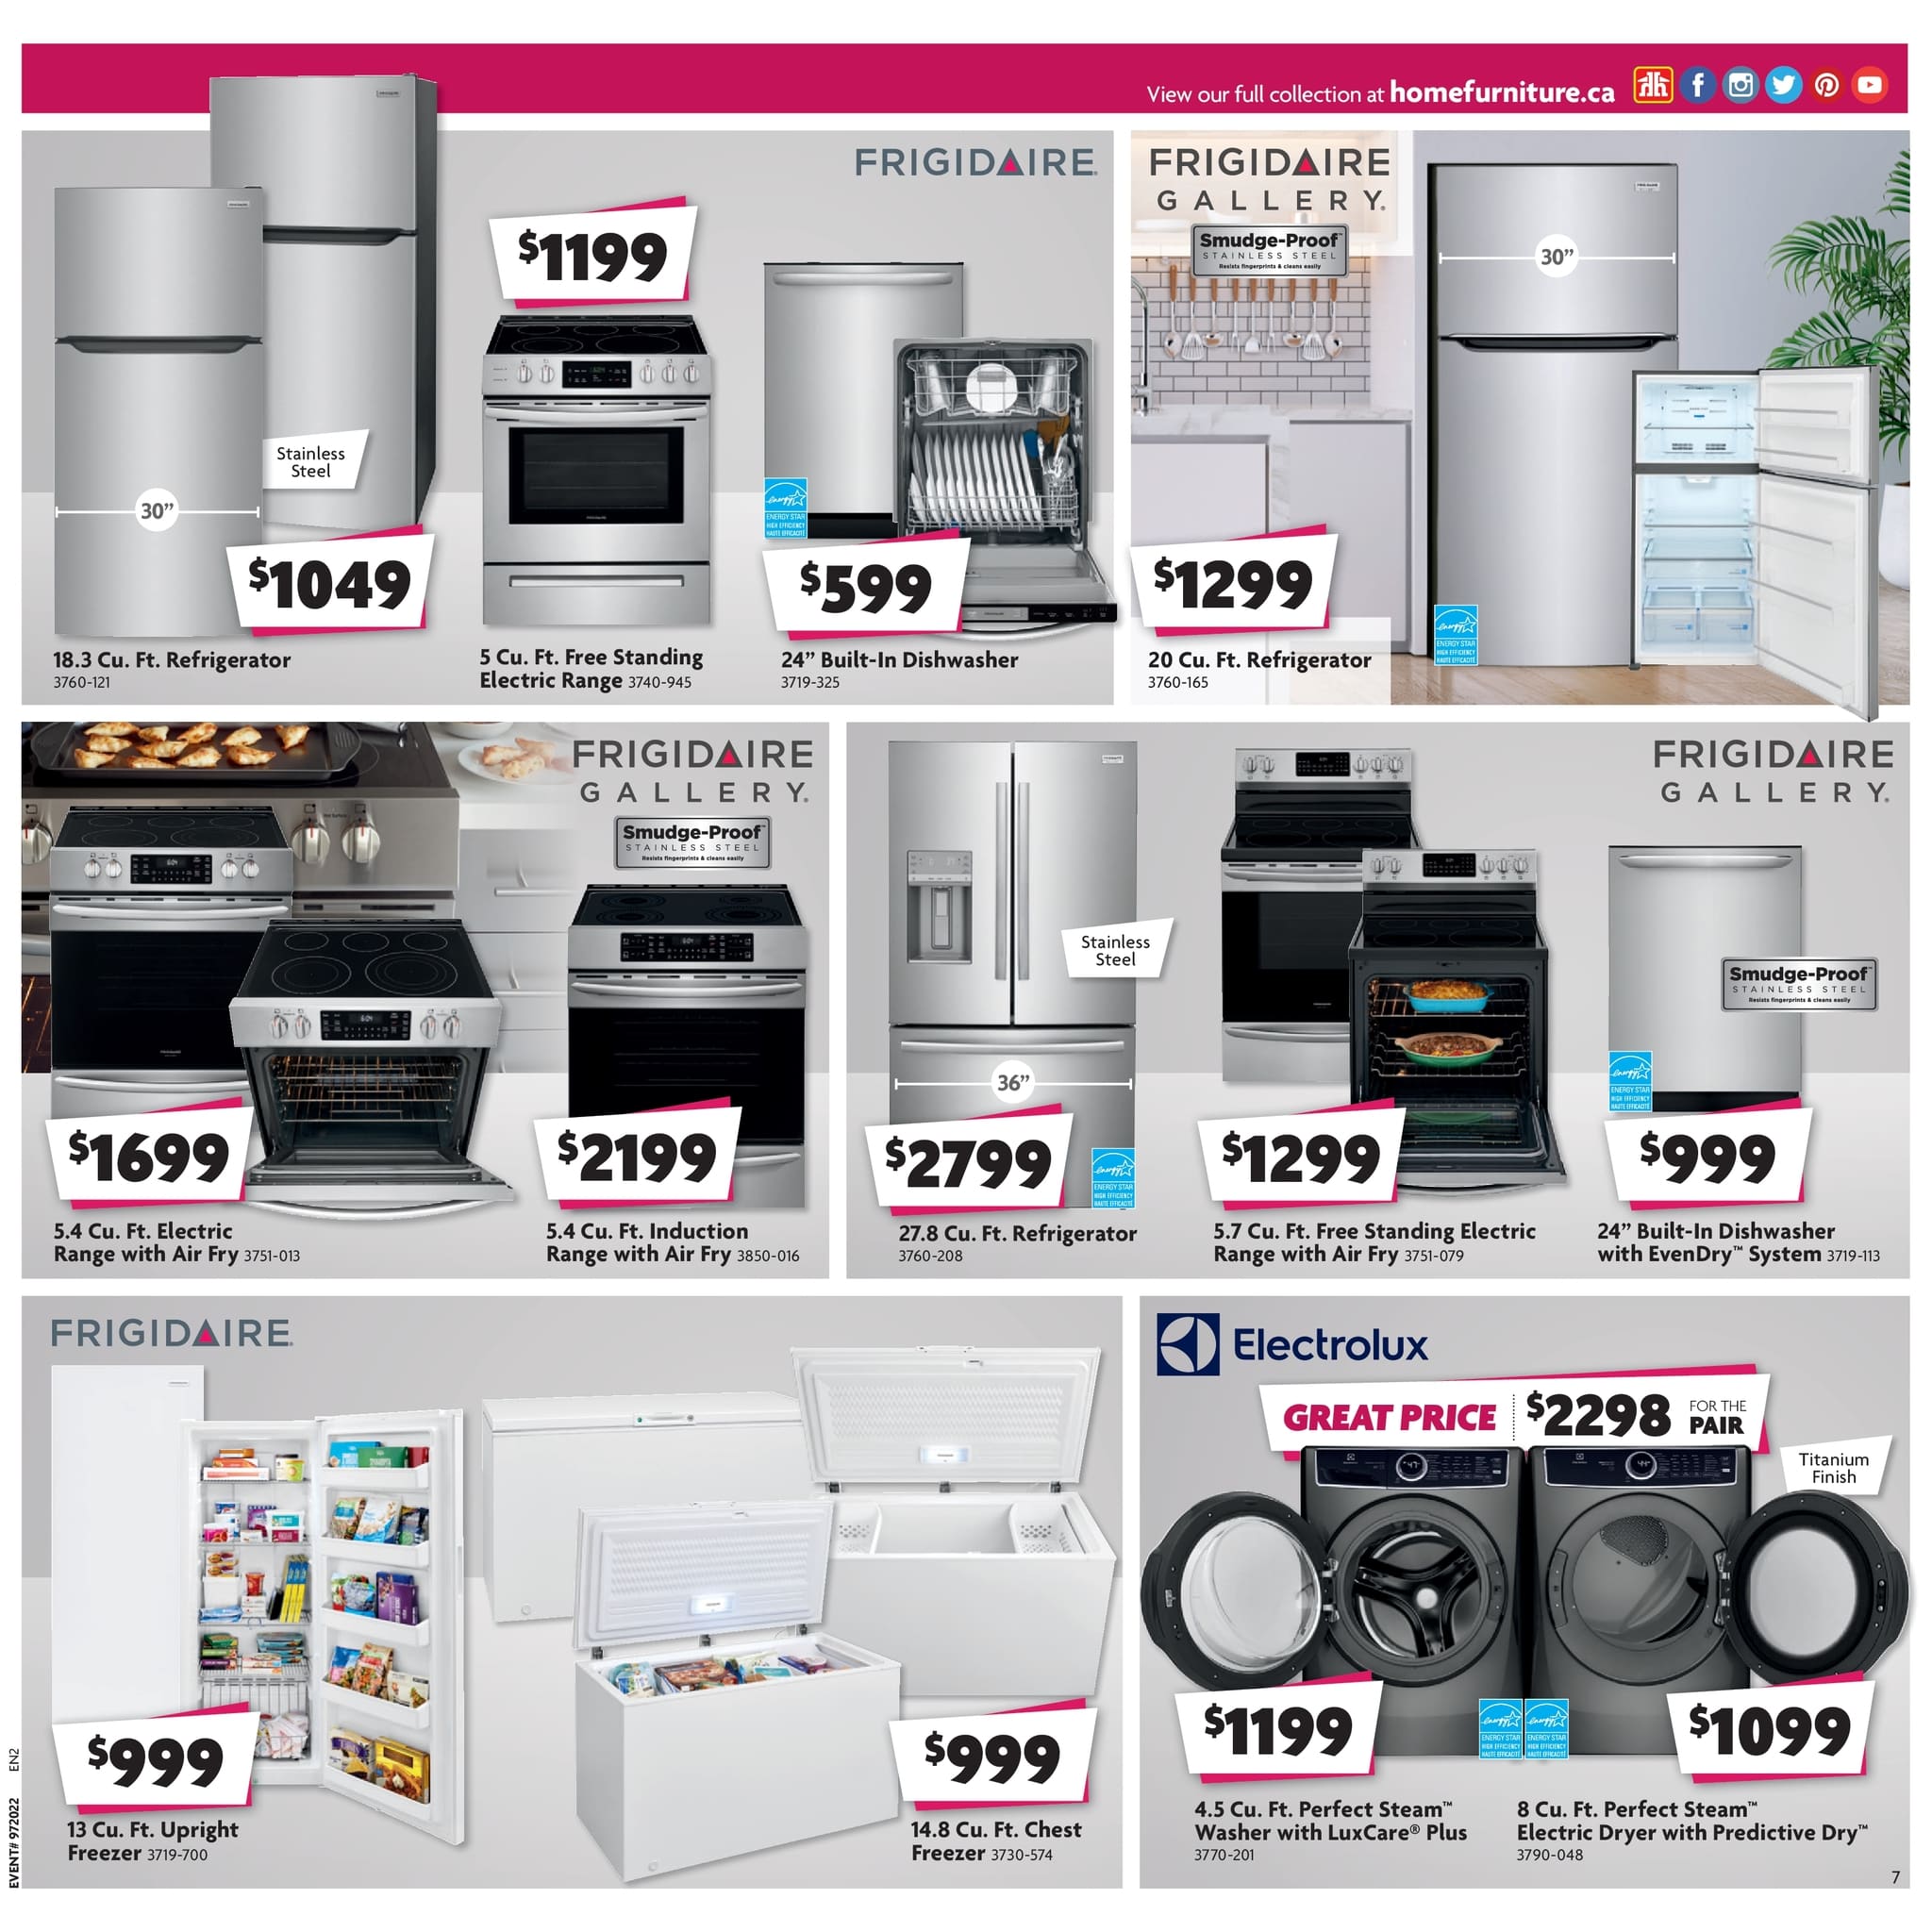 Home Furniture - Weekly Flyer Specials - Page 7